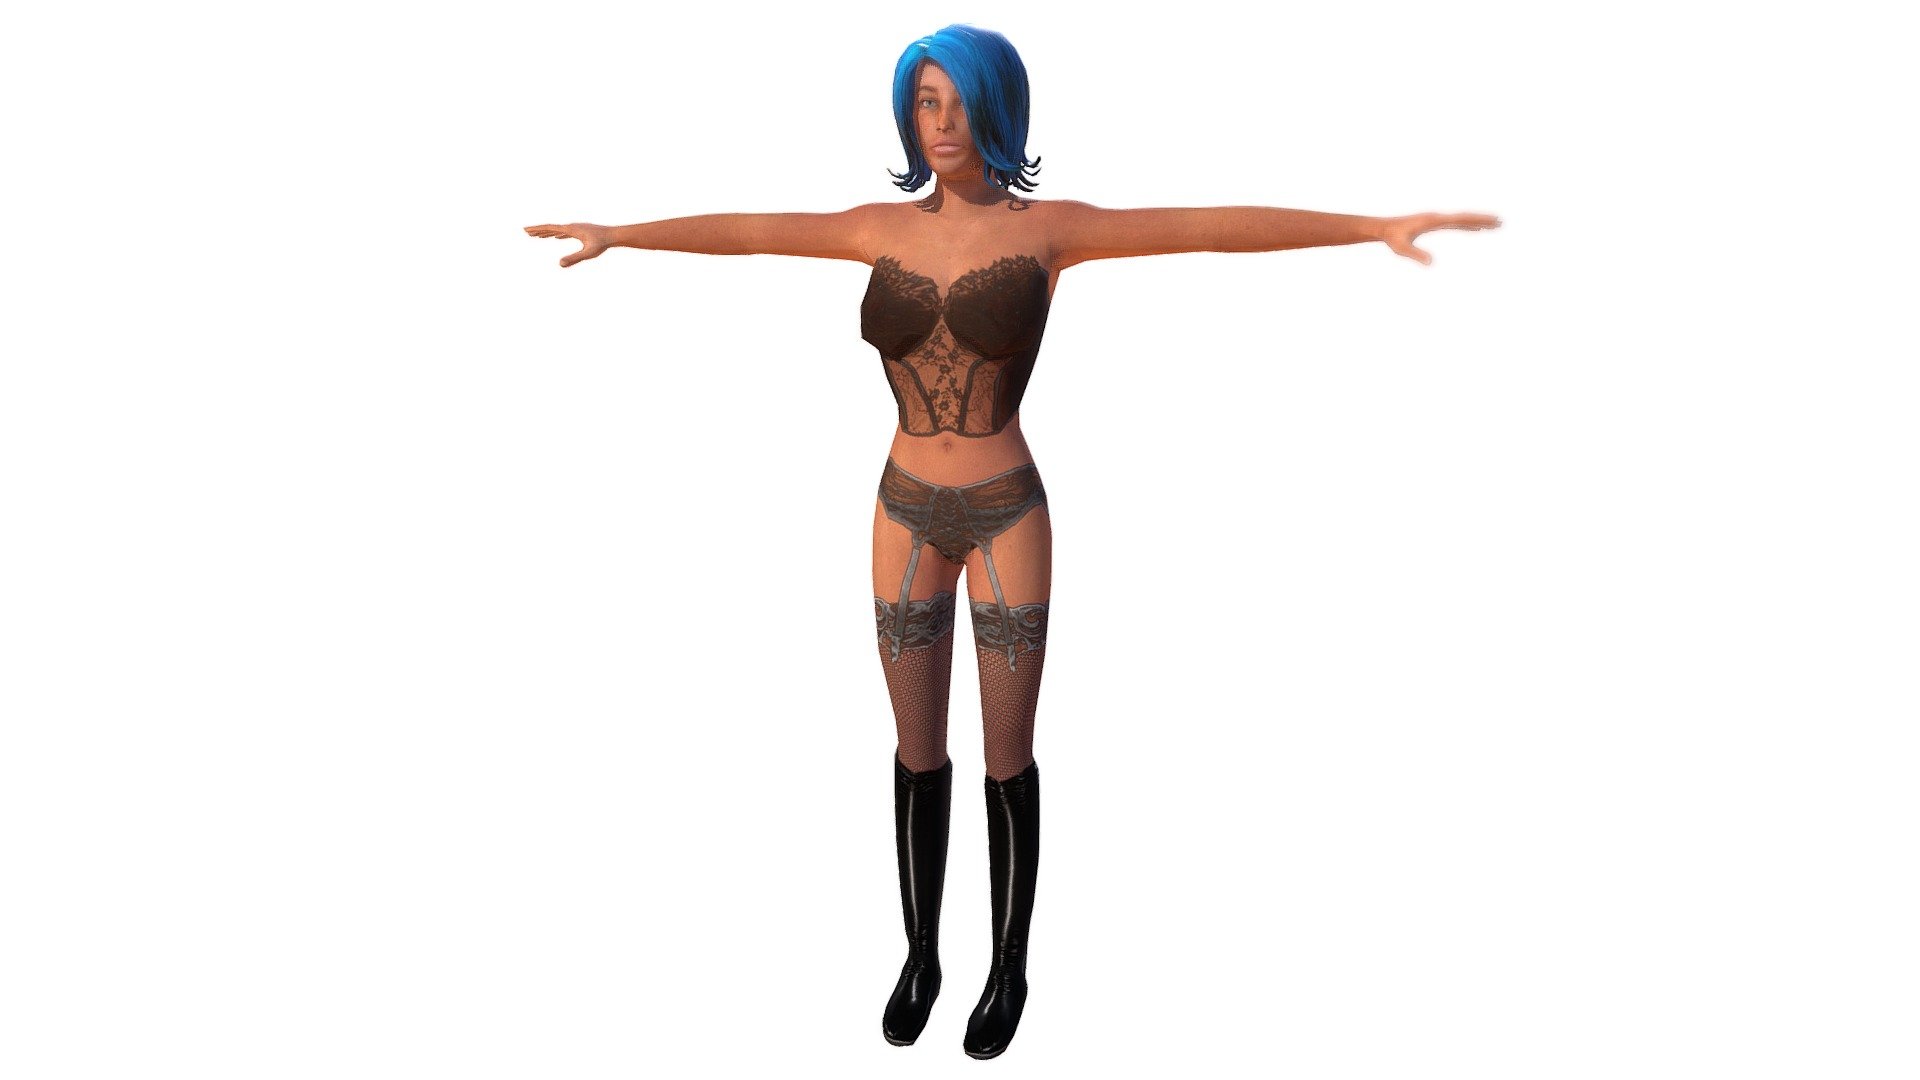 Game Ready Low poly Rigged Female Character 3D Model

Lingerie Girl low-poly 3d model ready for Virtual Reality (VR), Augmented Reality (AR), games and other real-time apps.

Includes FBX Unity Skeleton mesh

All textures are included 2048 x 2048 px. (Color, Normal, Specular) - Lingerie Girl - 3D model by Free 3D Models (@free3dmodels) 3d model